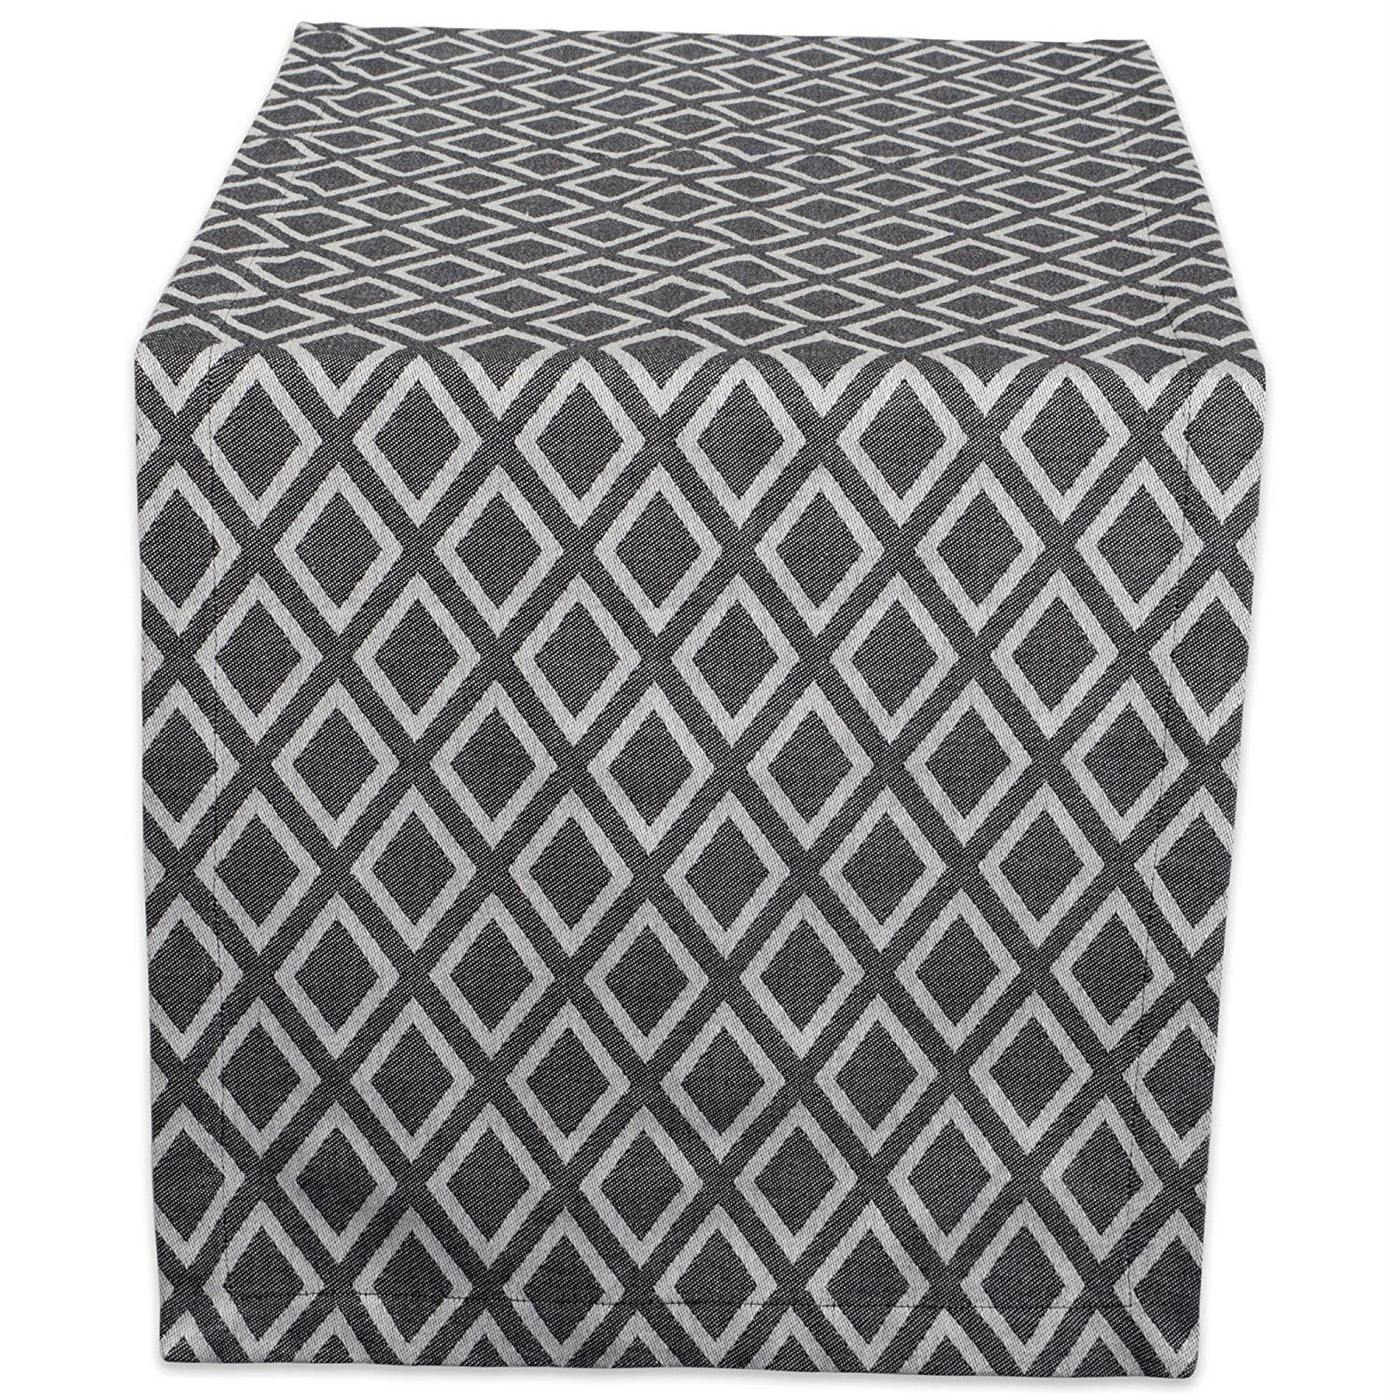 Black and White Diamond Pattern Table Runner - 108 inches